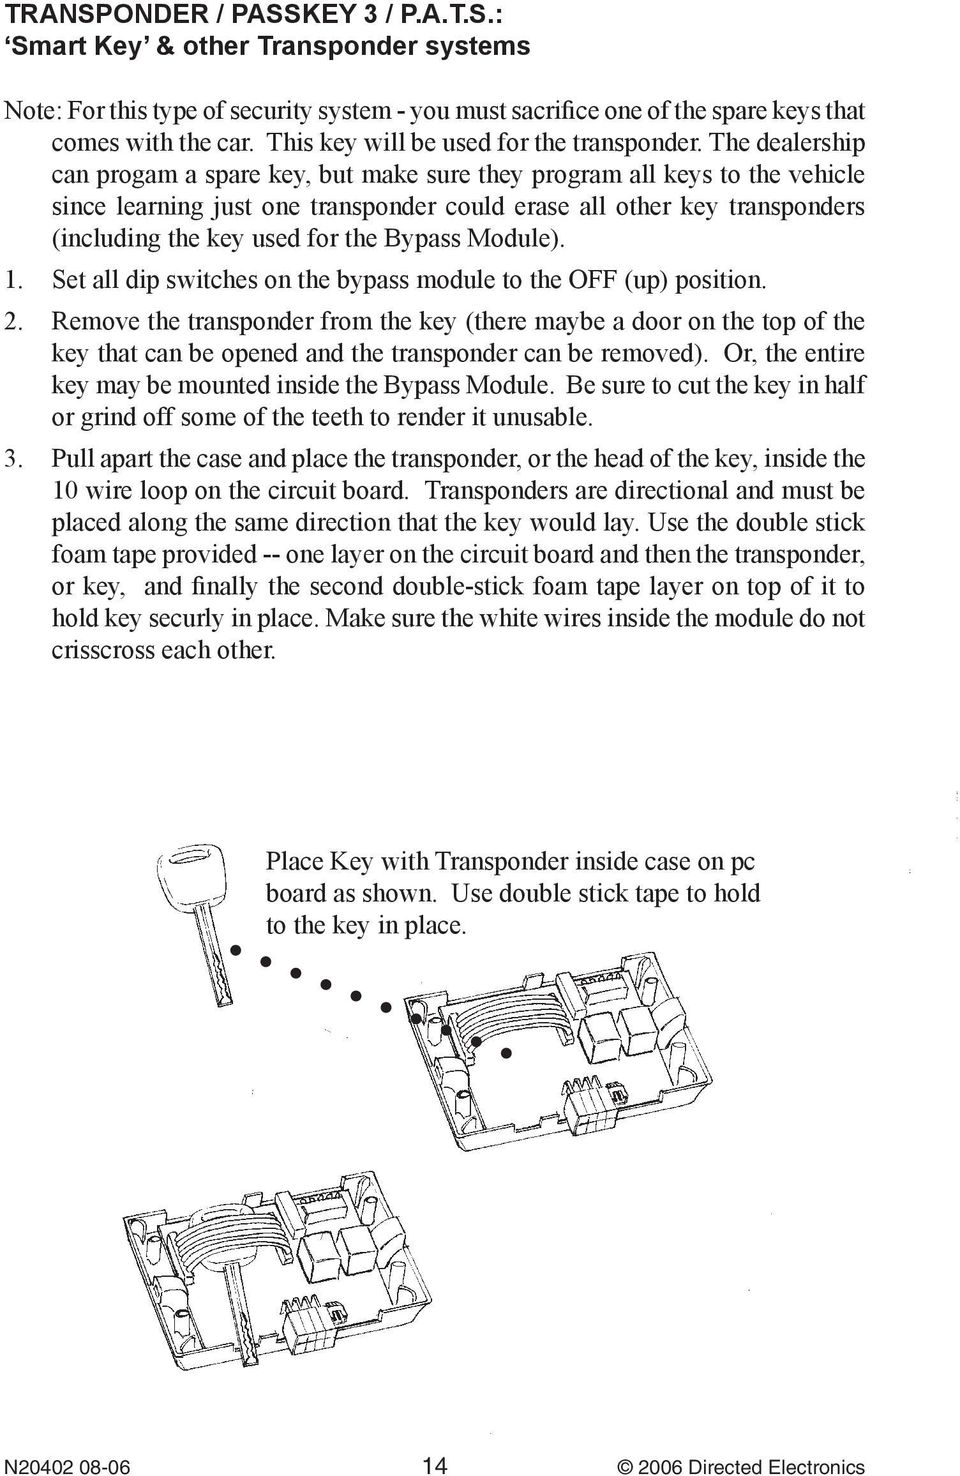 The dealership can progam a spare key, but make sure they program all keys to the vehicle since learning just one transponder could erase all other key transponders (including the key used for the